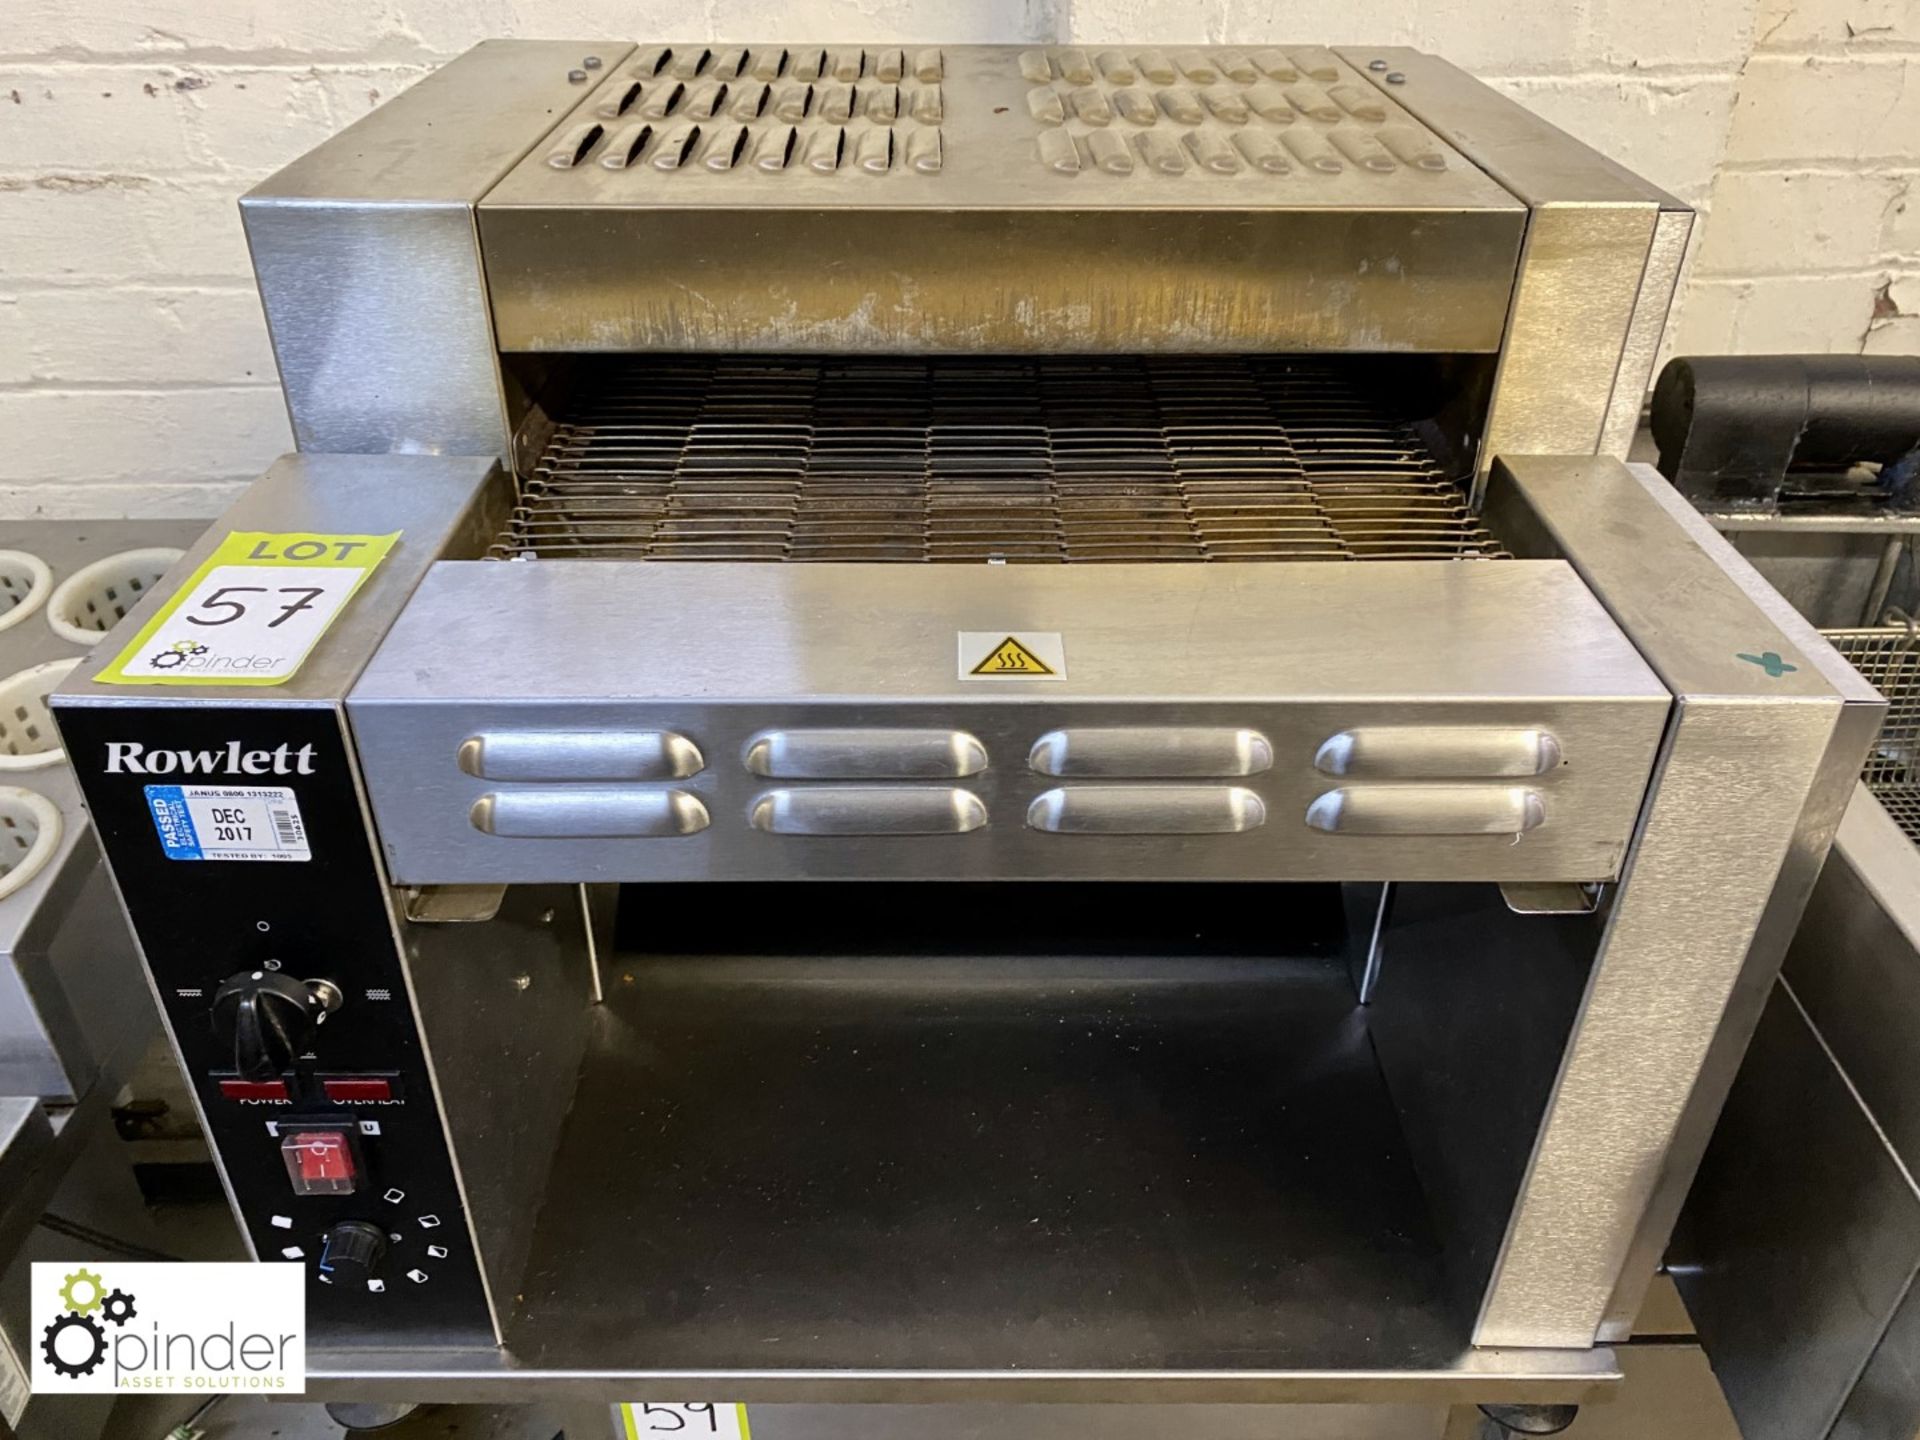 Rowlett stainless steel Commercial Conveyor Toaster, 240volts